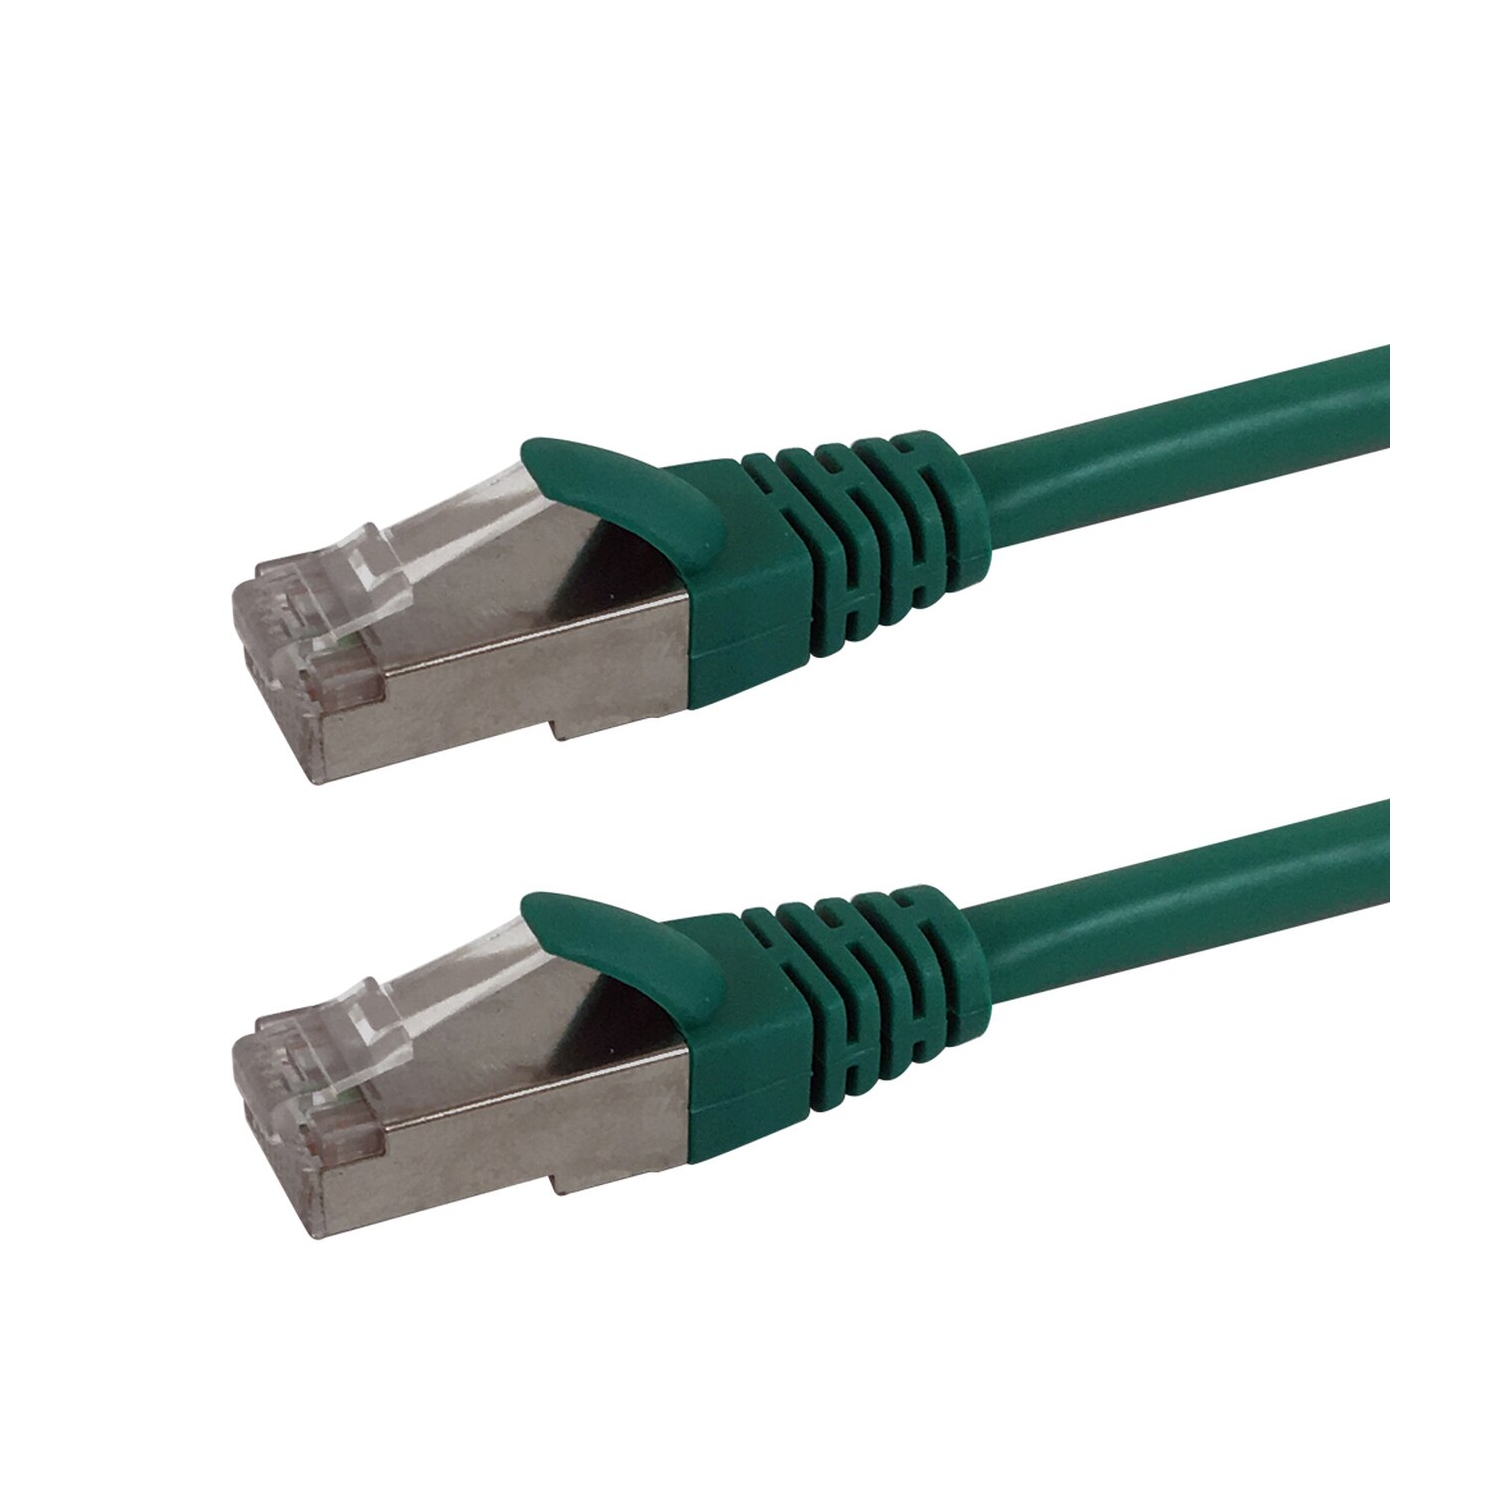 HYFAI Ethernet RJ45 Networking CAT6A SSTP 10GB Molded Patch Cable Premium Fluke® Certified - CMR Riser Rated 2 FT, Green